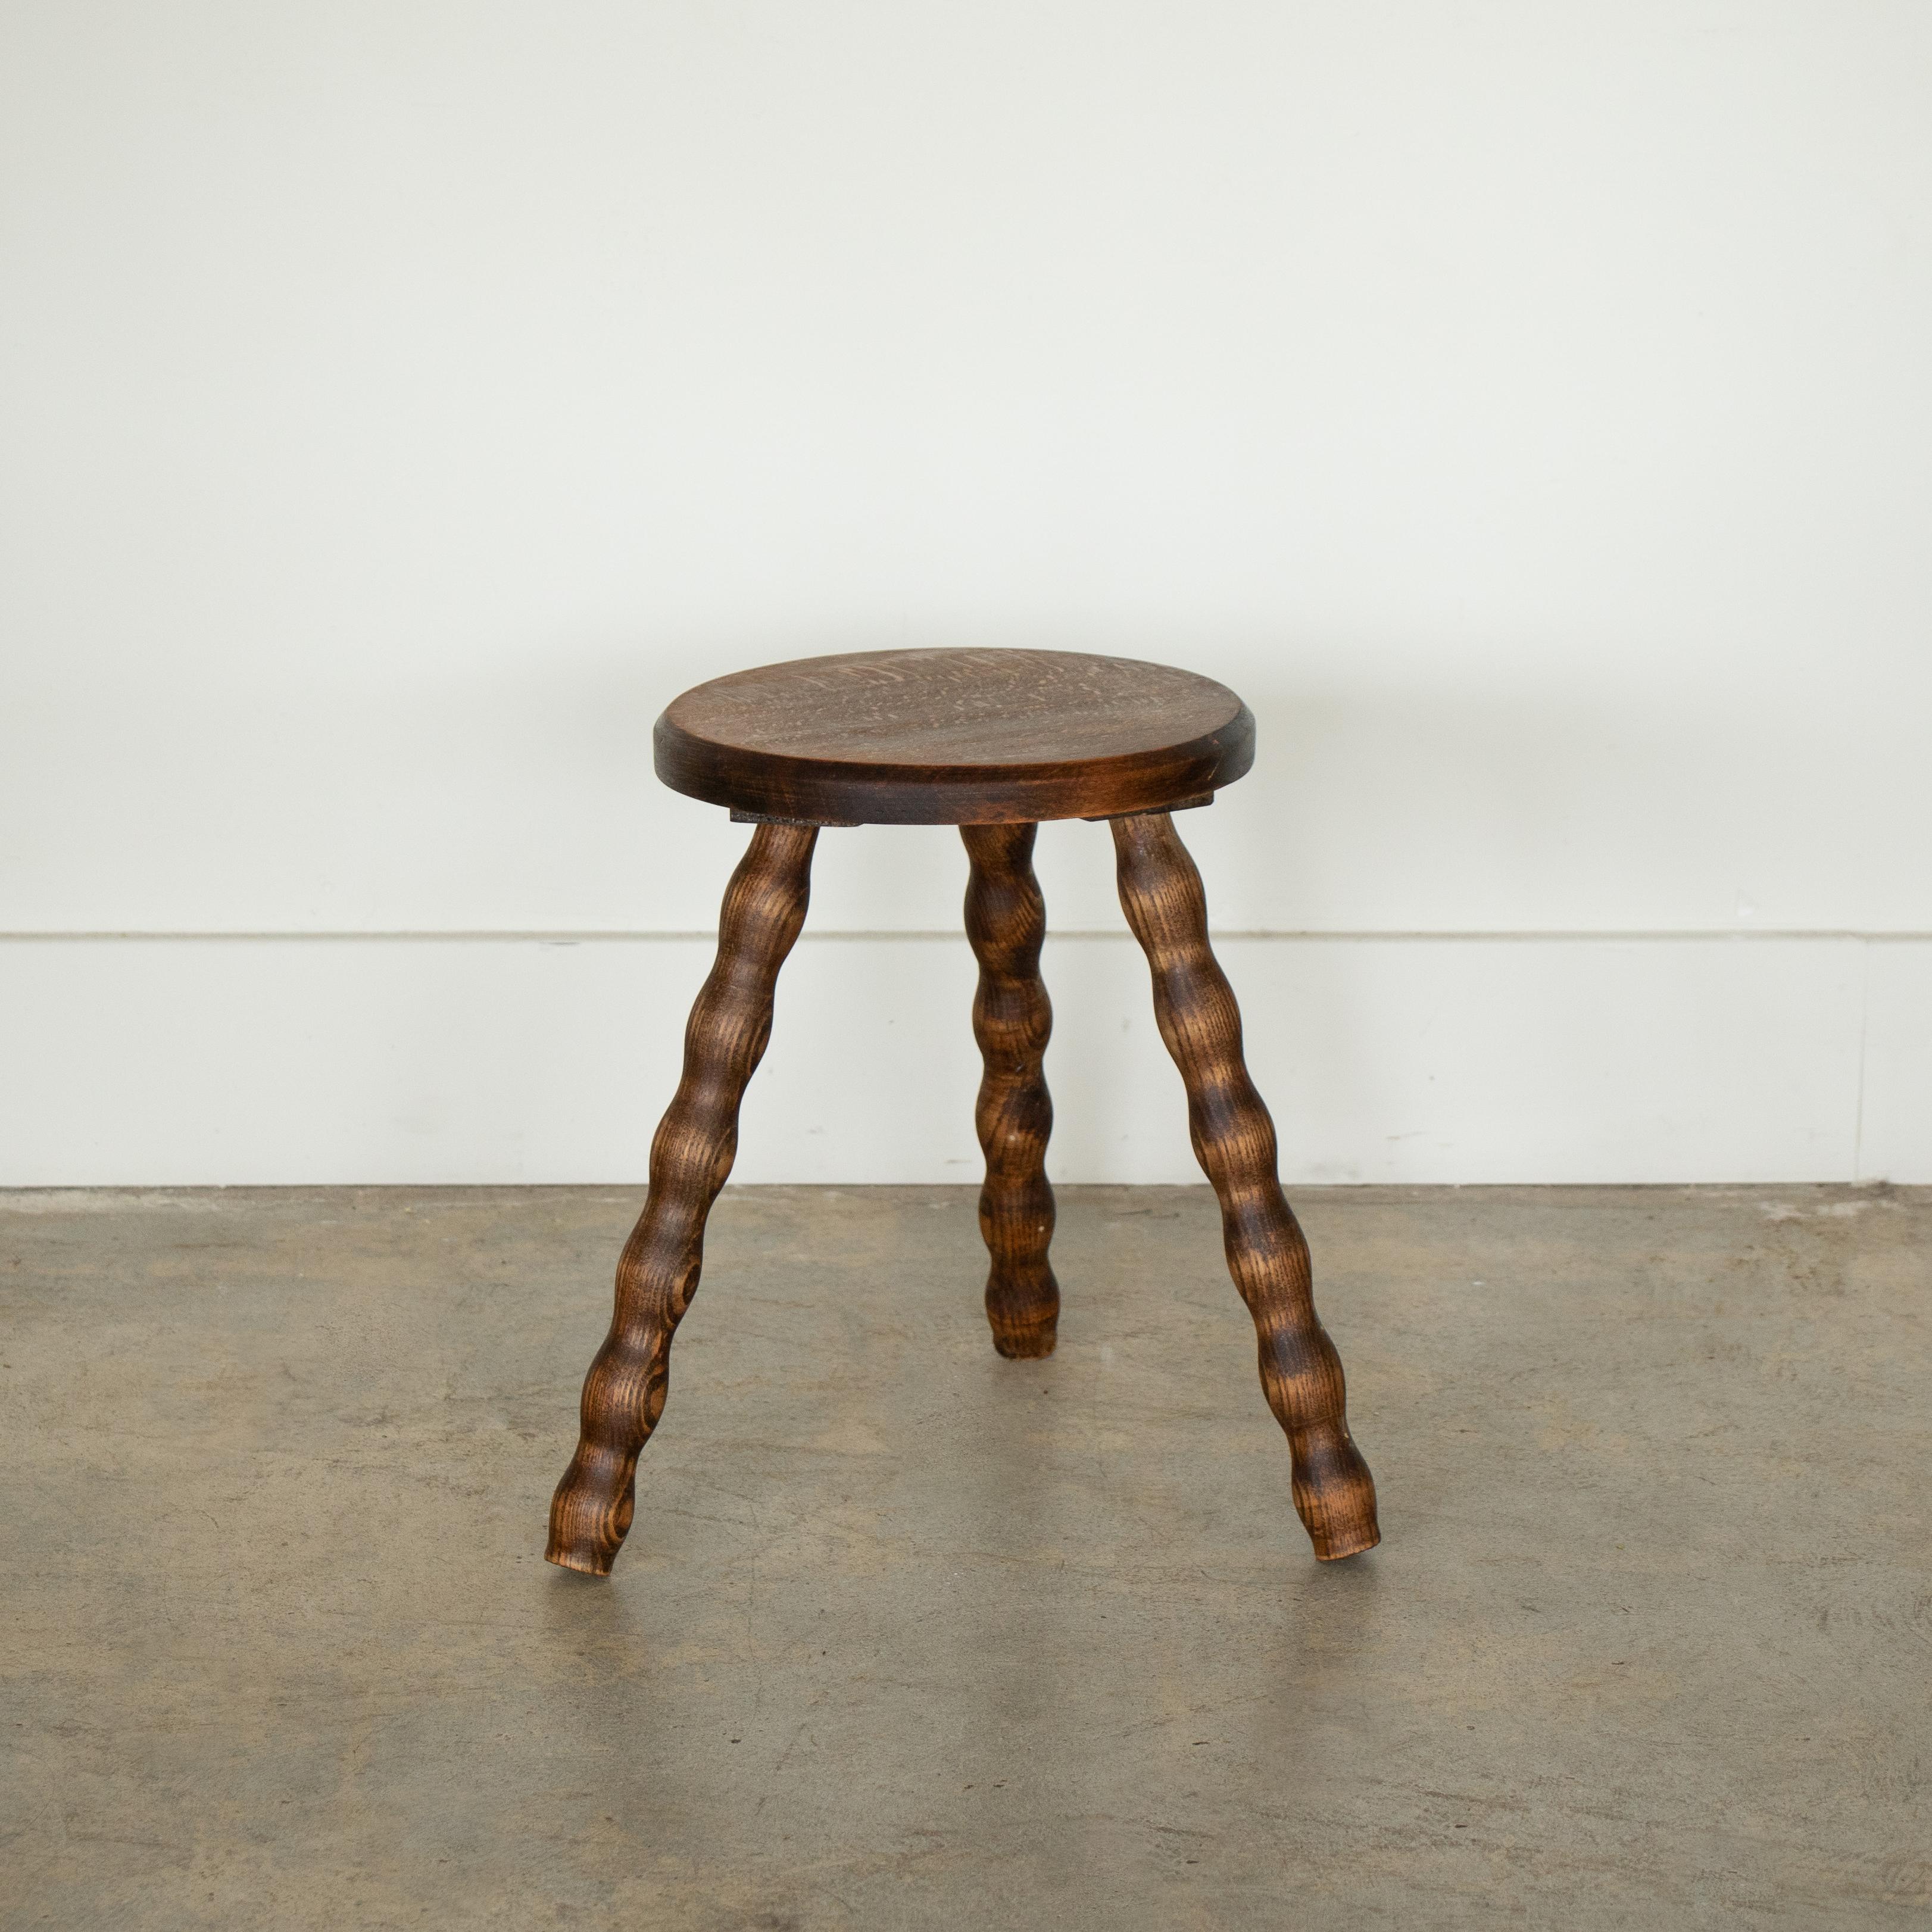 Vintage short wood stool with beautiful wavy wood legs and circular seat from France. Original wood finish with great age markings and patina. Can be used as stool or as side table next to chairs. 



